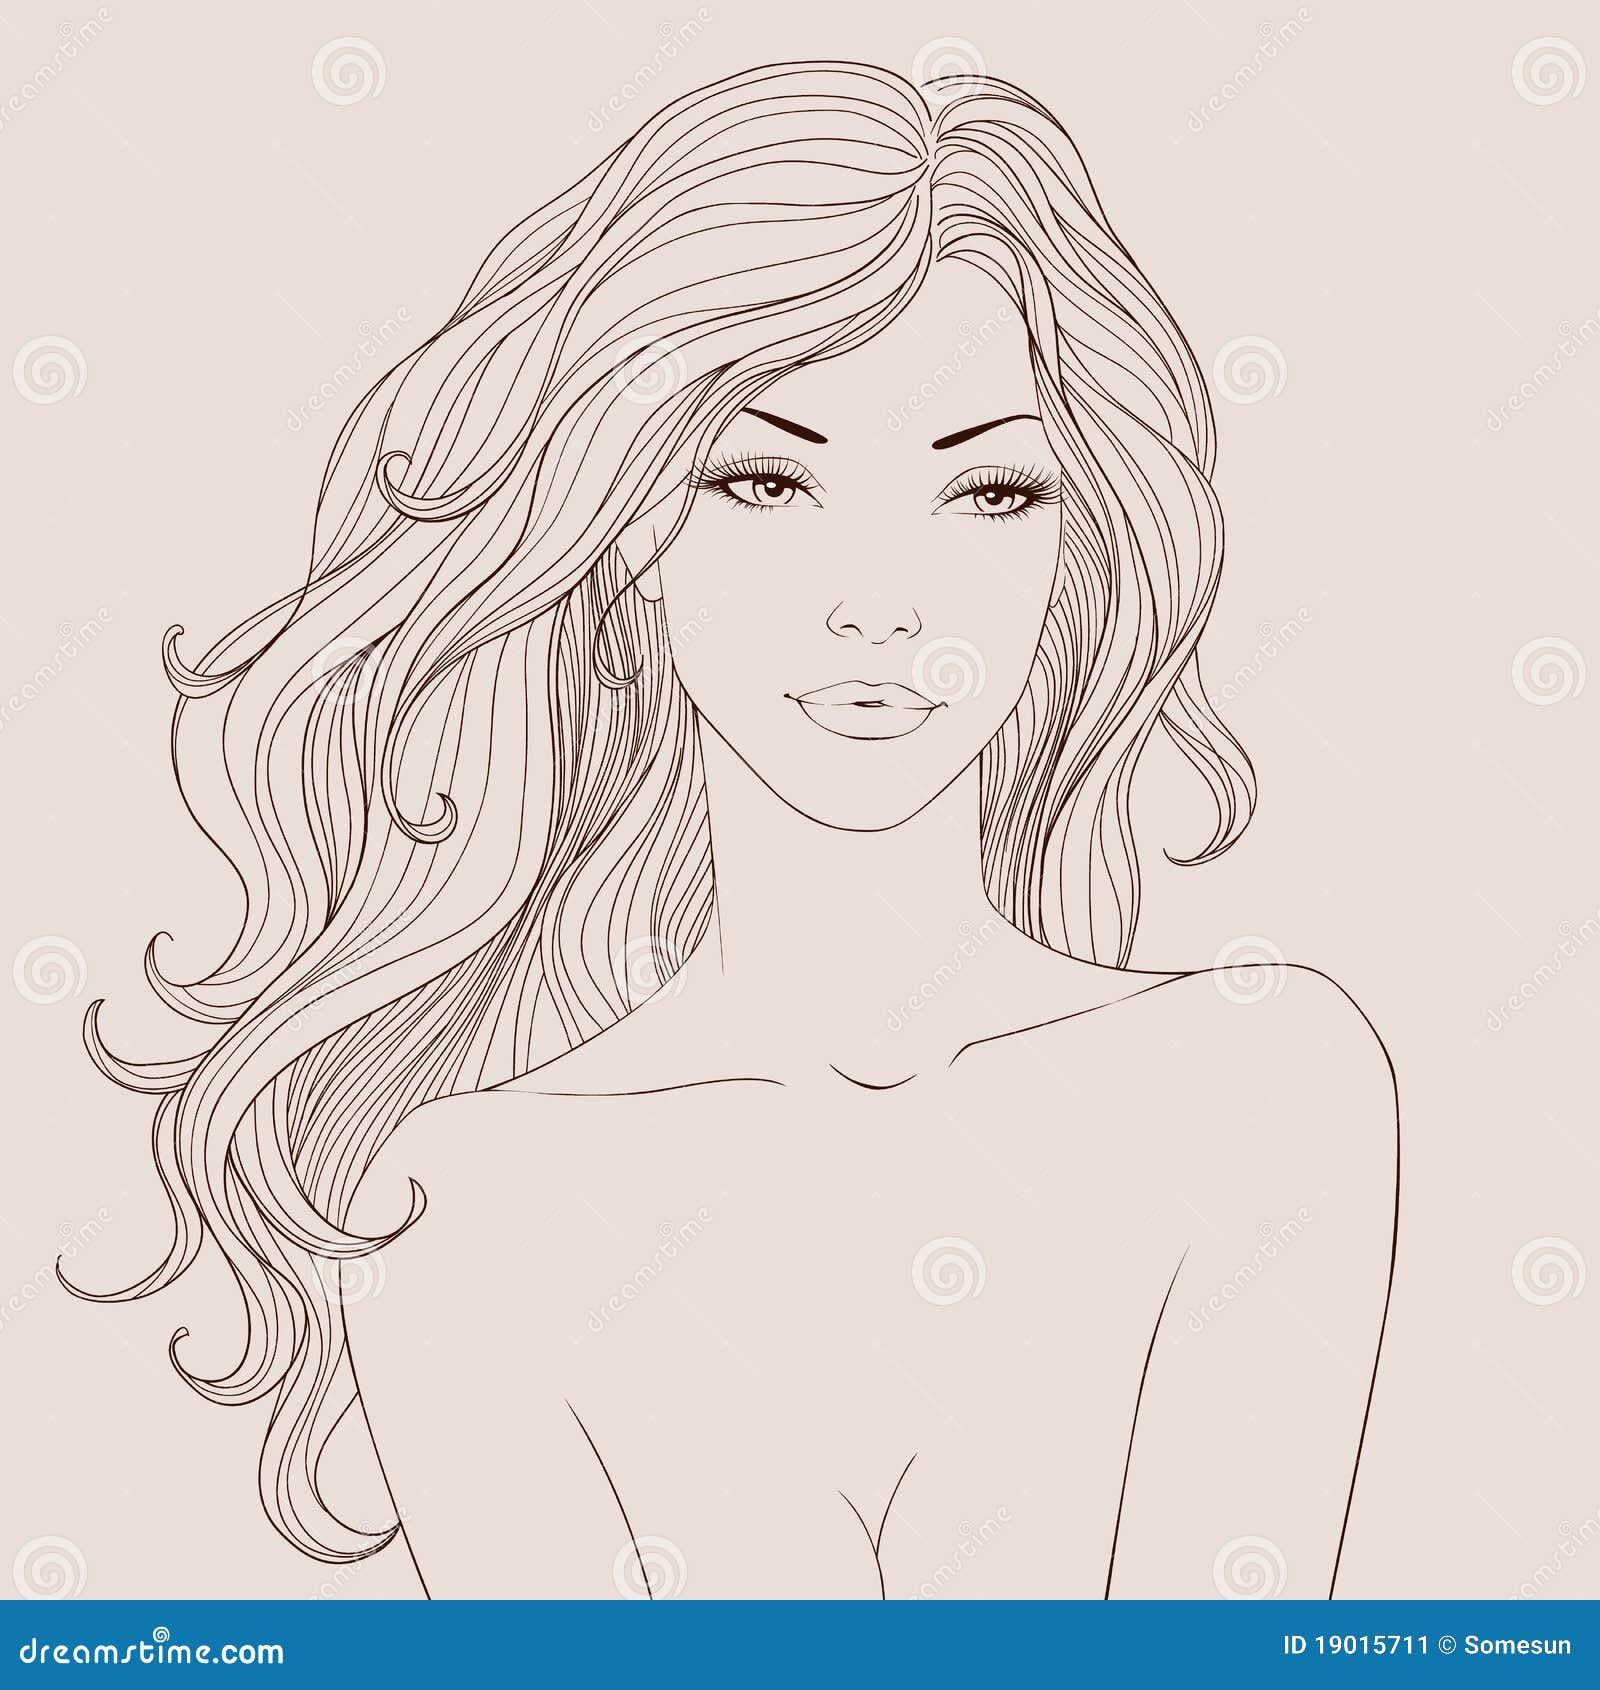 Long Wavy Hair: Over 12,600 Royalty-Free Licensable Stock Illustrations &  Drawings